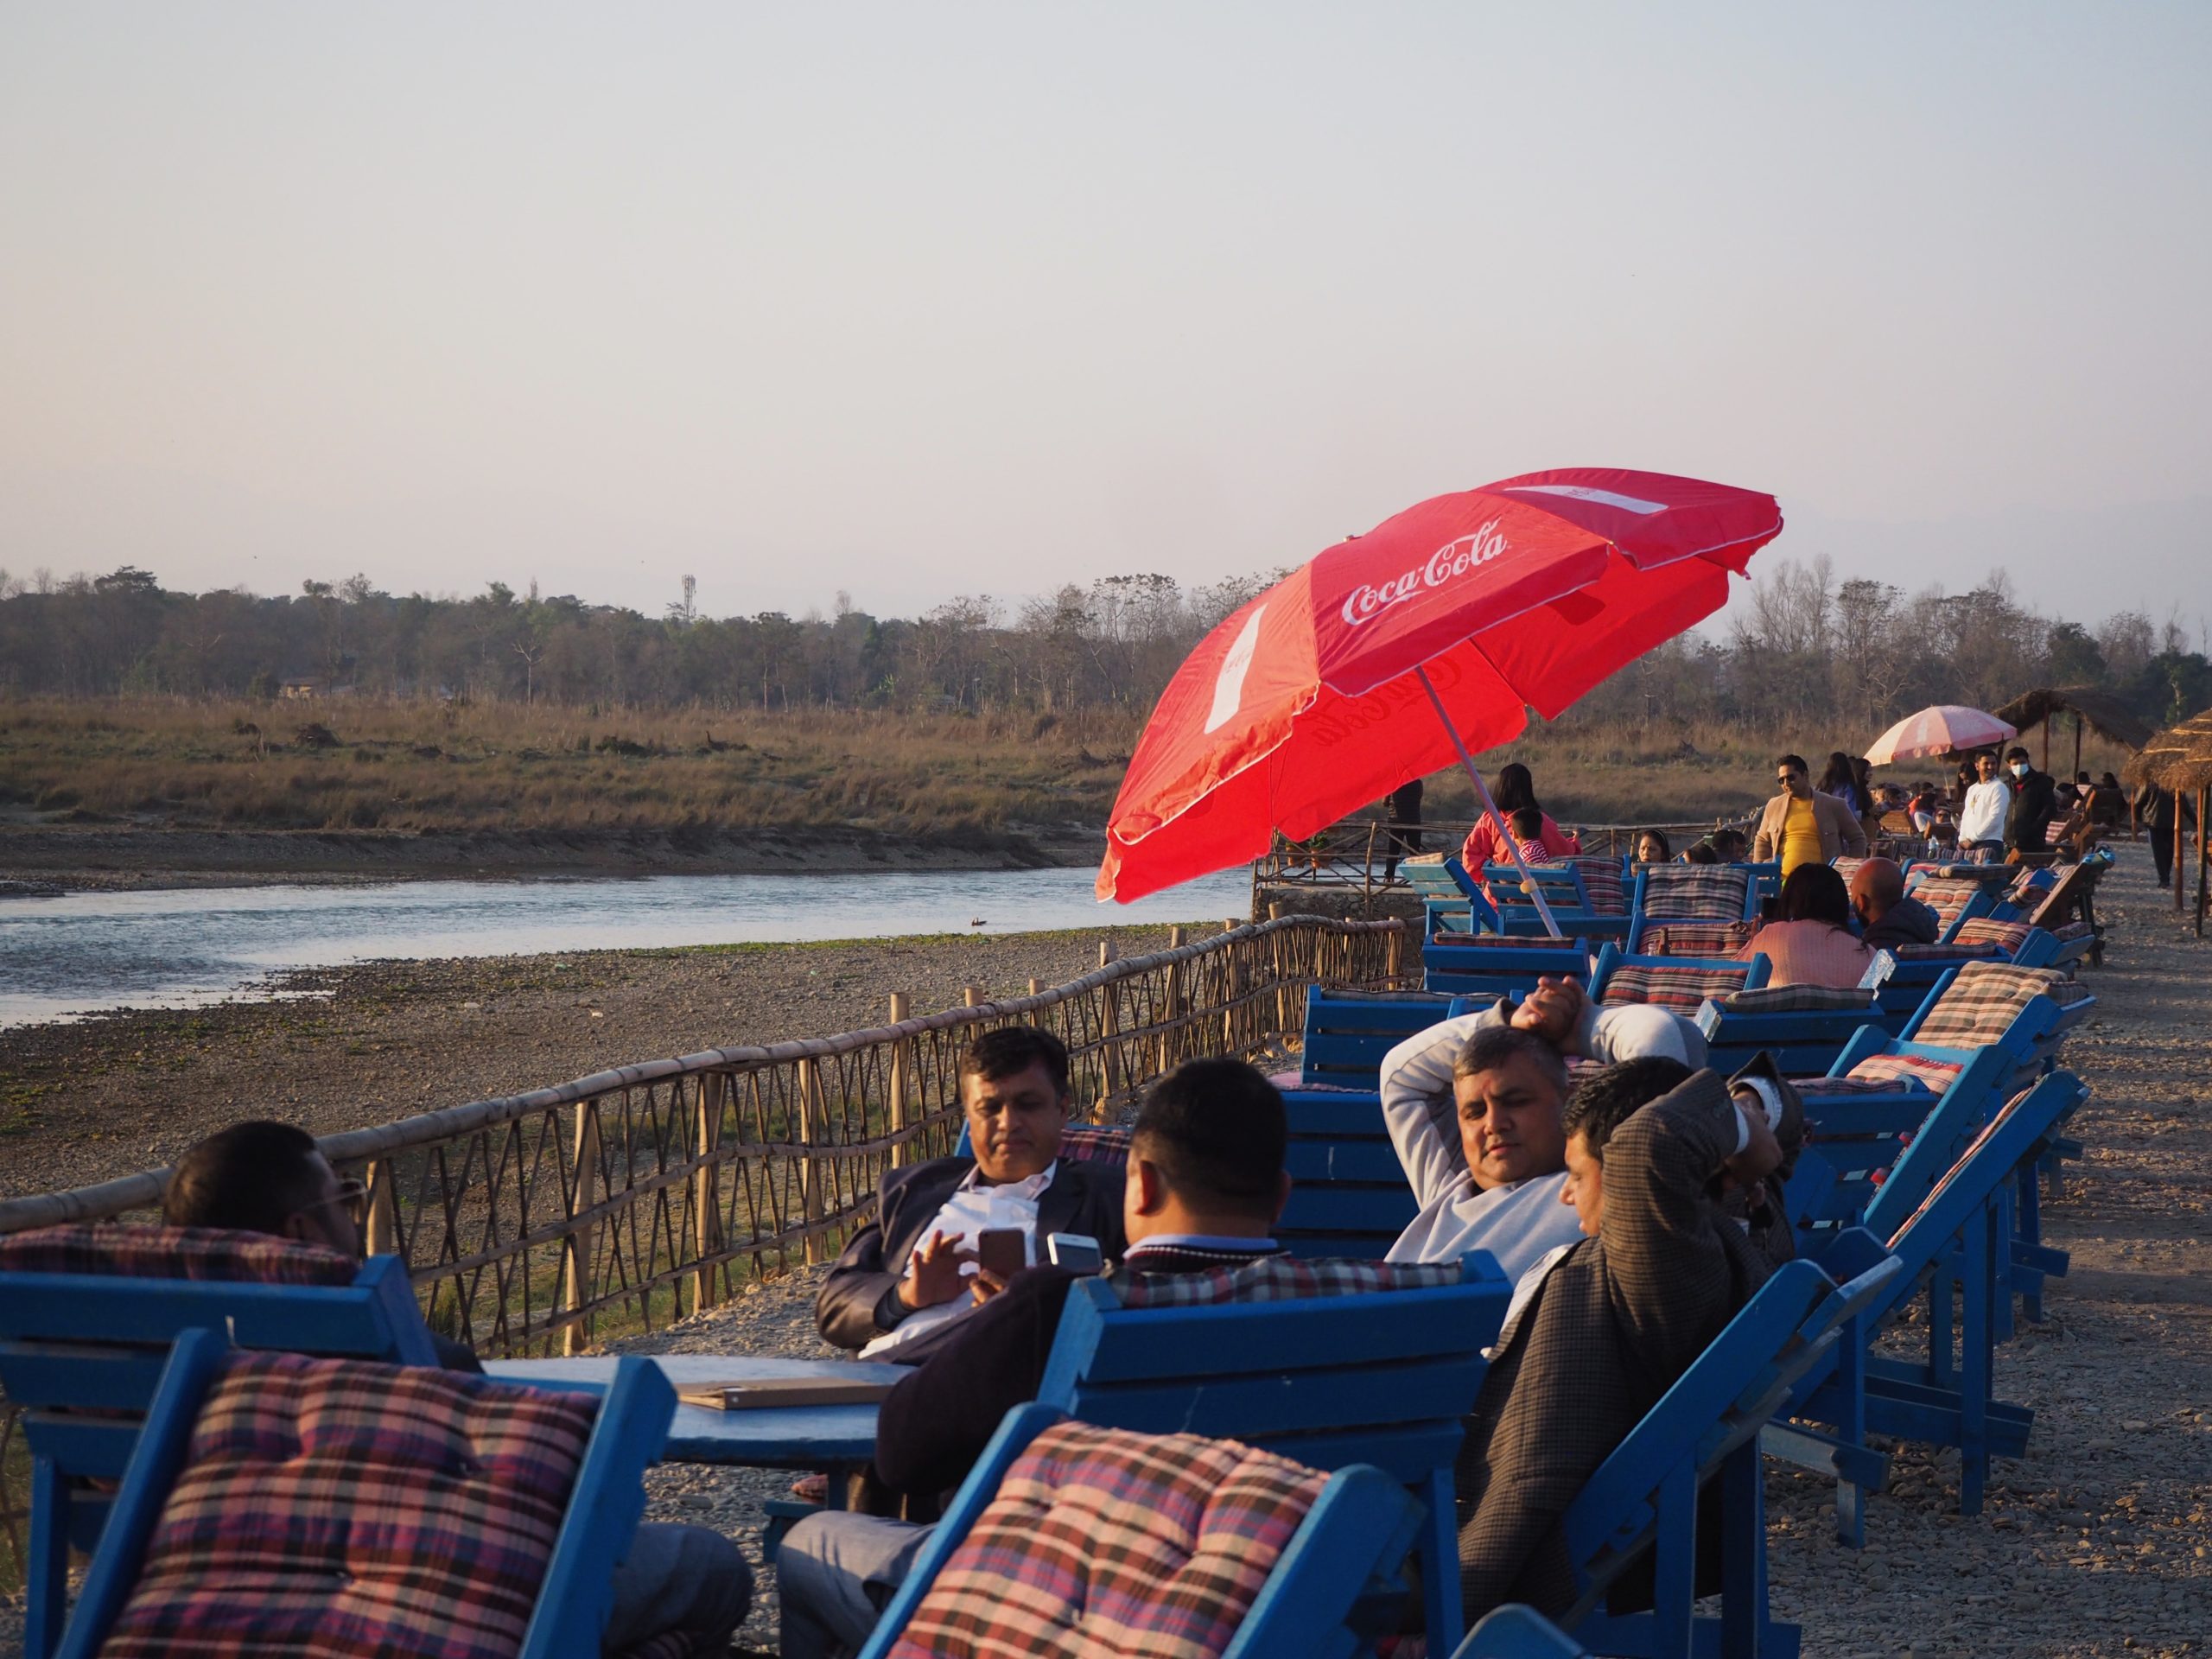 Domestic tourists in the town of Sauraha, Chitwan National Park